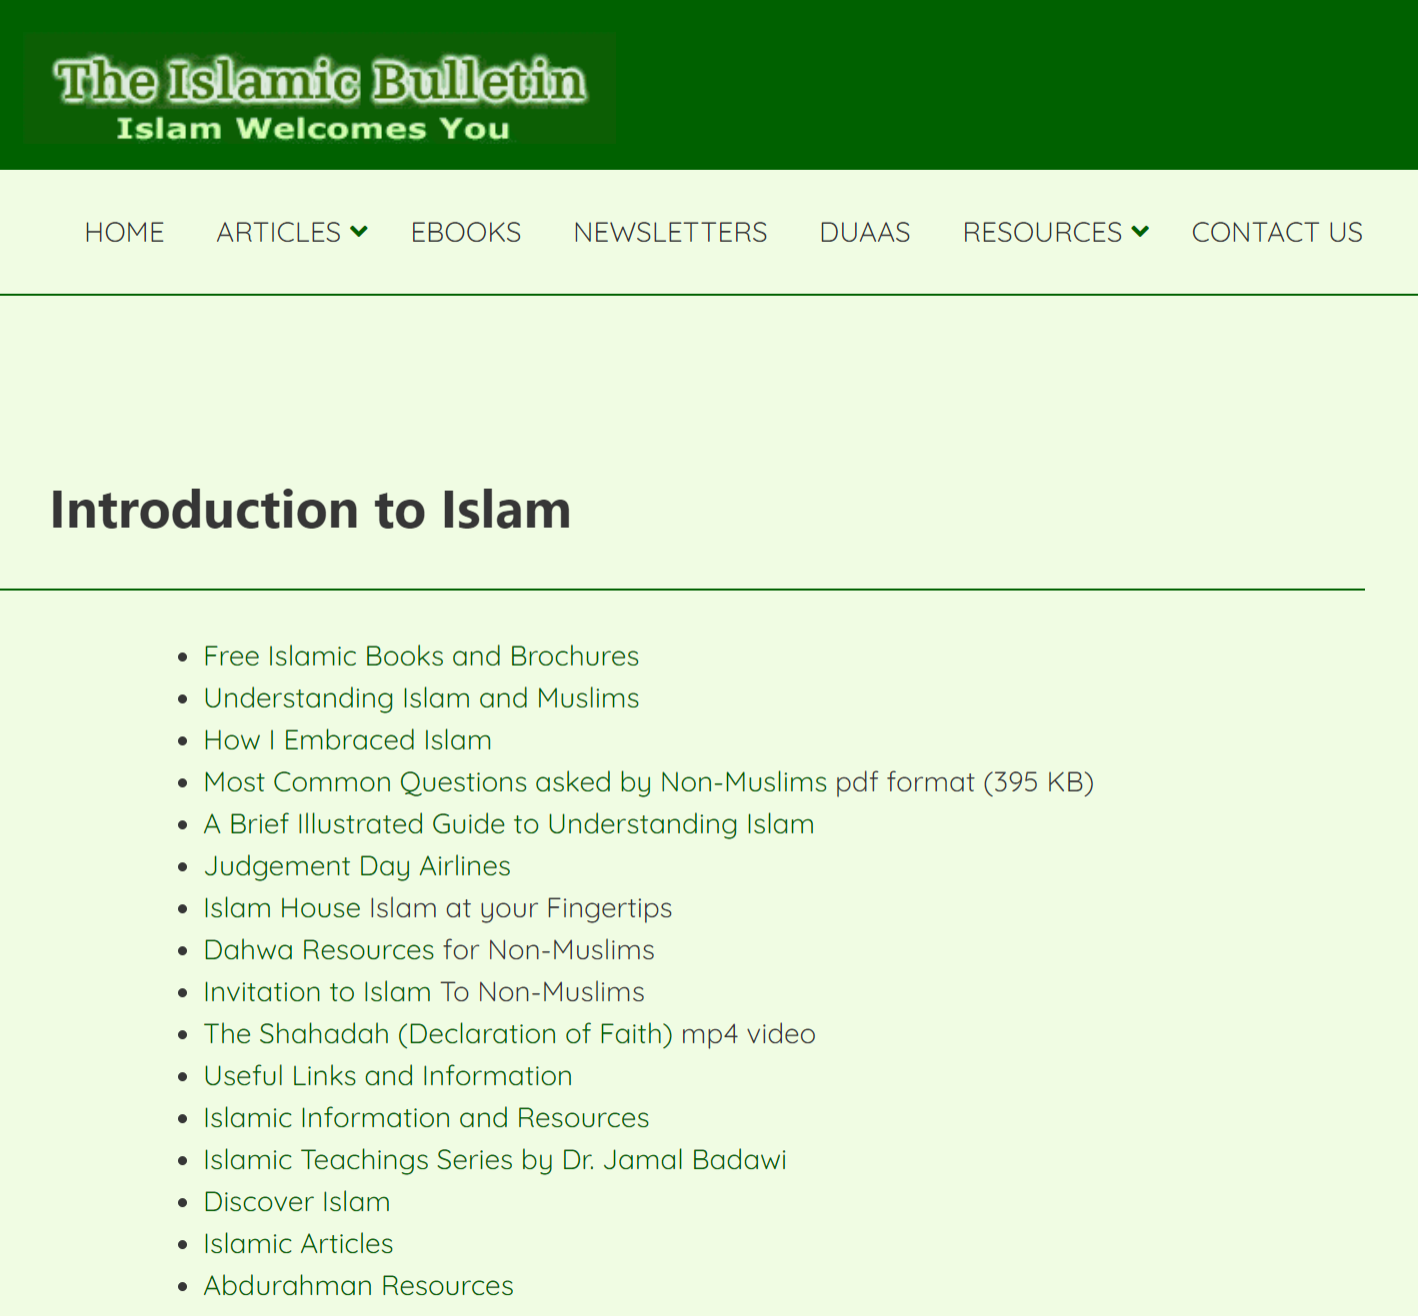 Introduction to Islam Resources - The Islamic Bulletin